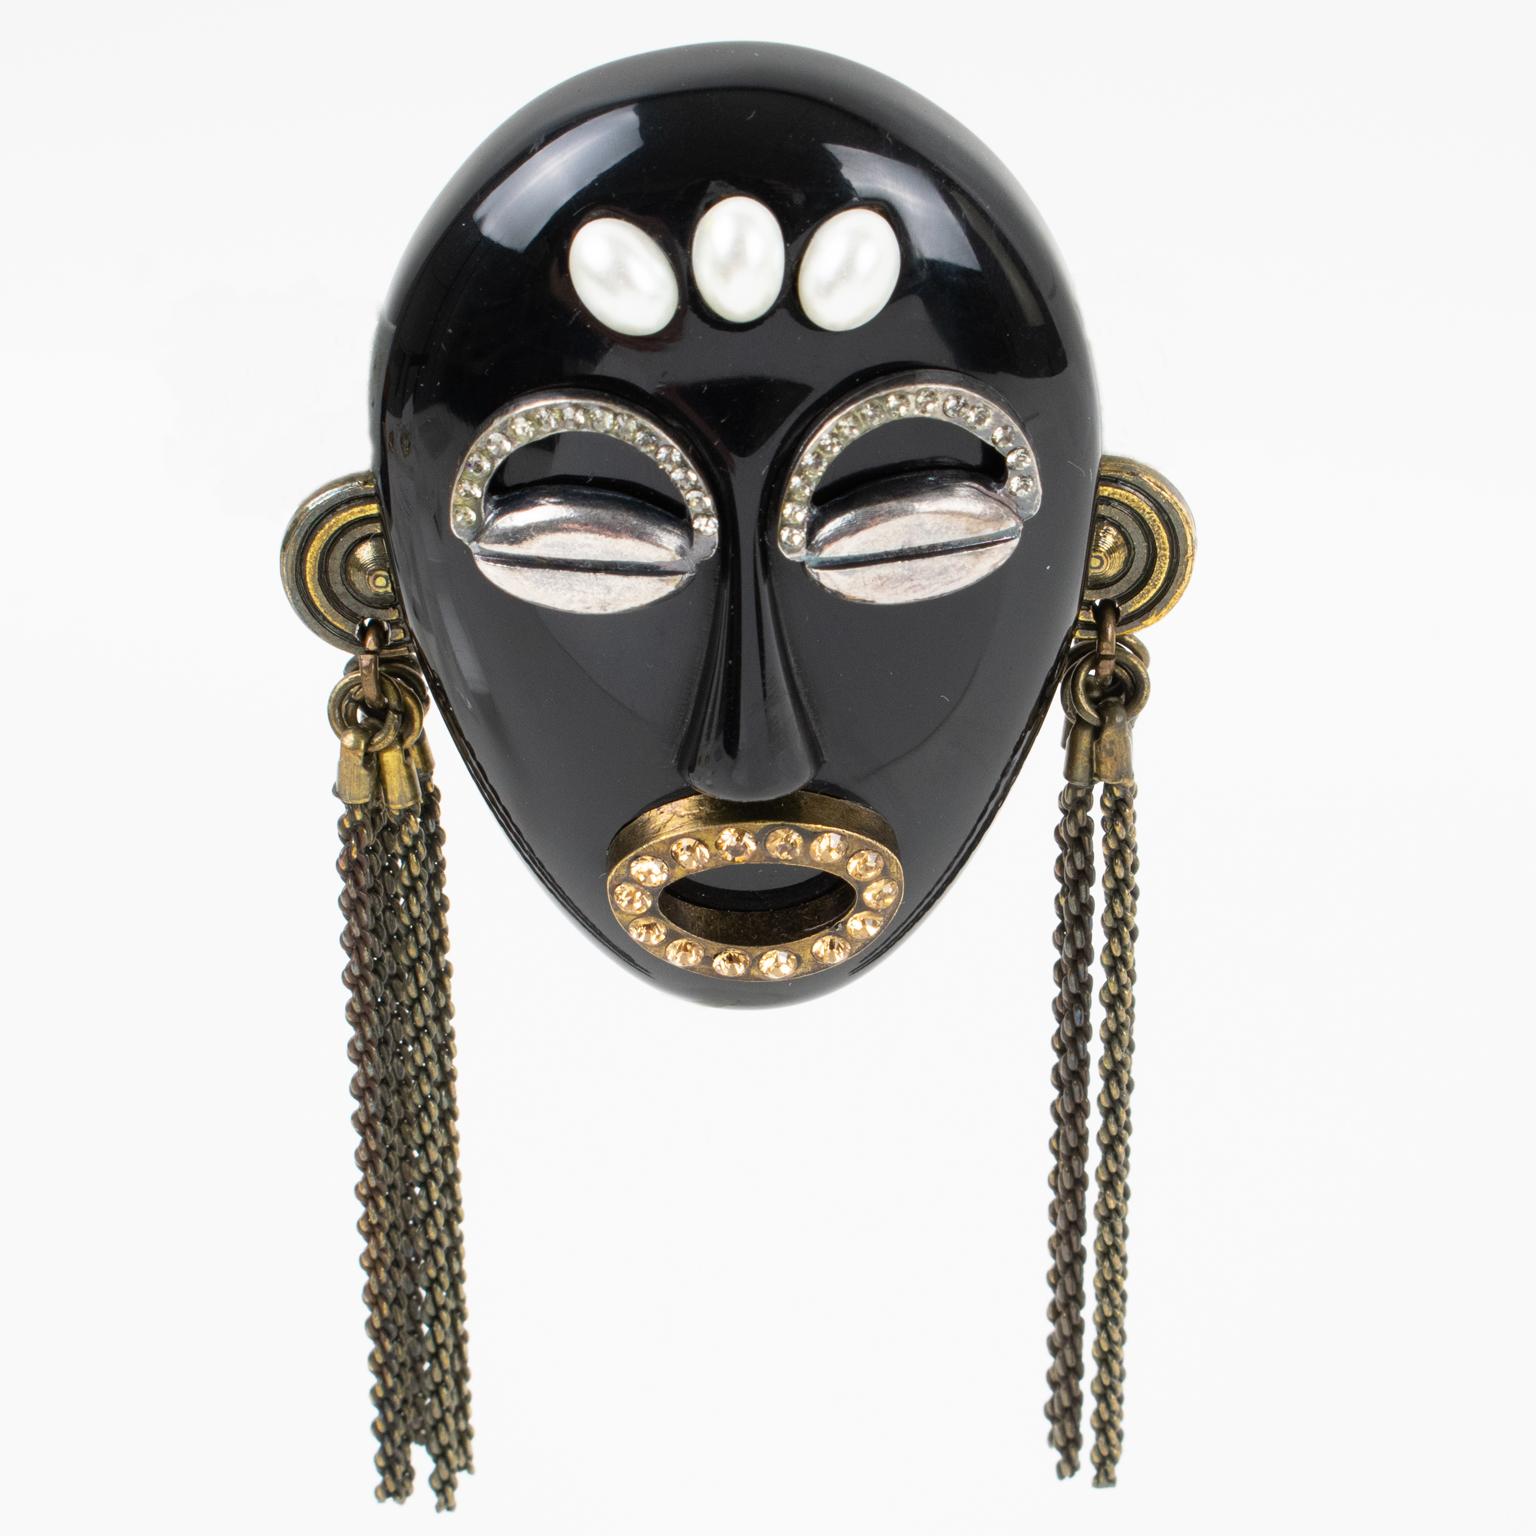 Missoni Italy 1991 Black Resin and Metal Tribal Mask Pin Brooch For Sale 5